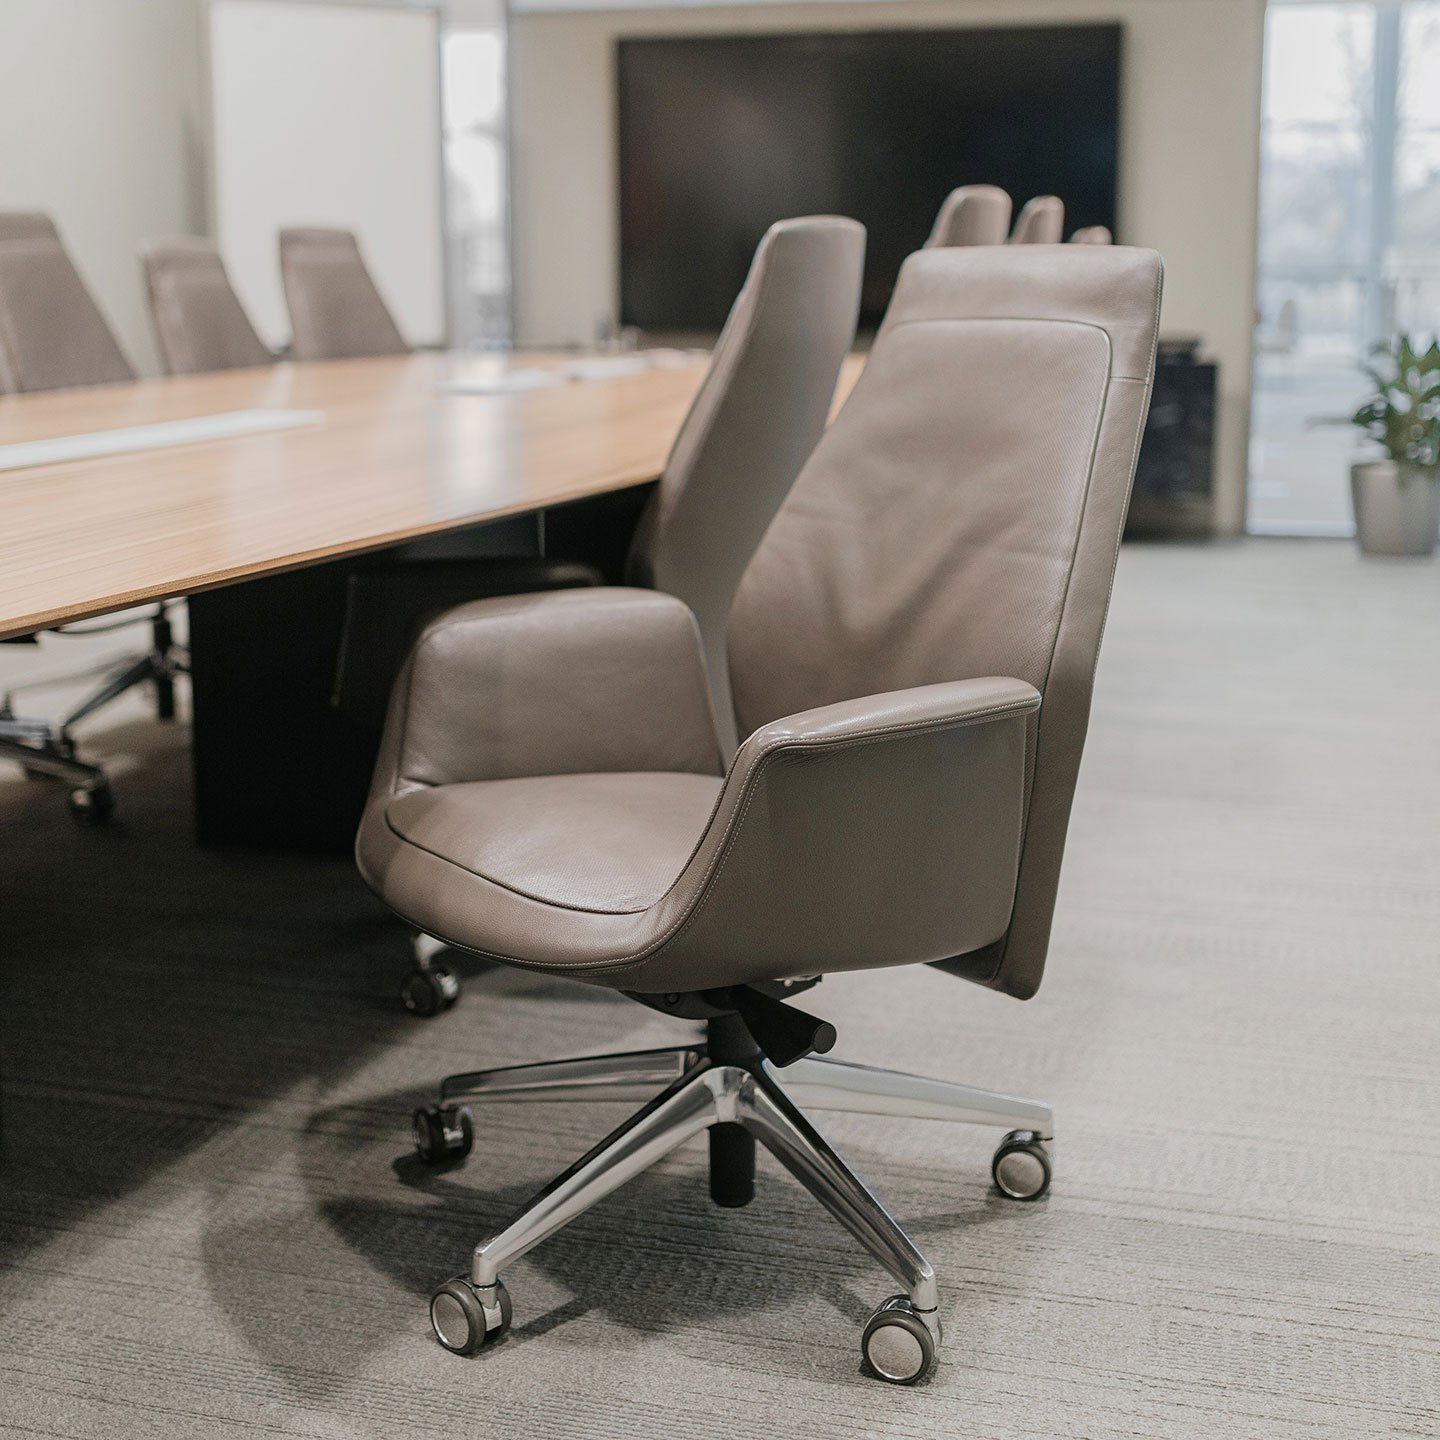 Haworth Downtown chairs in light brown leather in a conference room